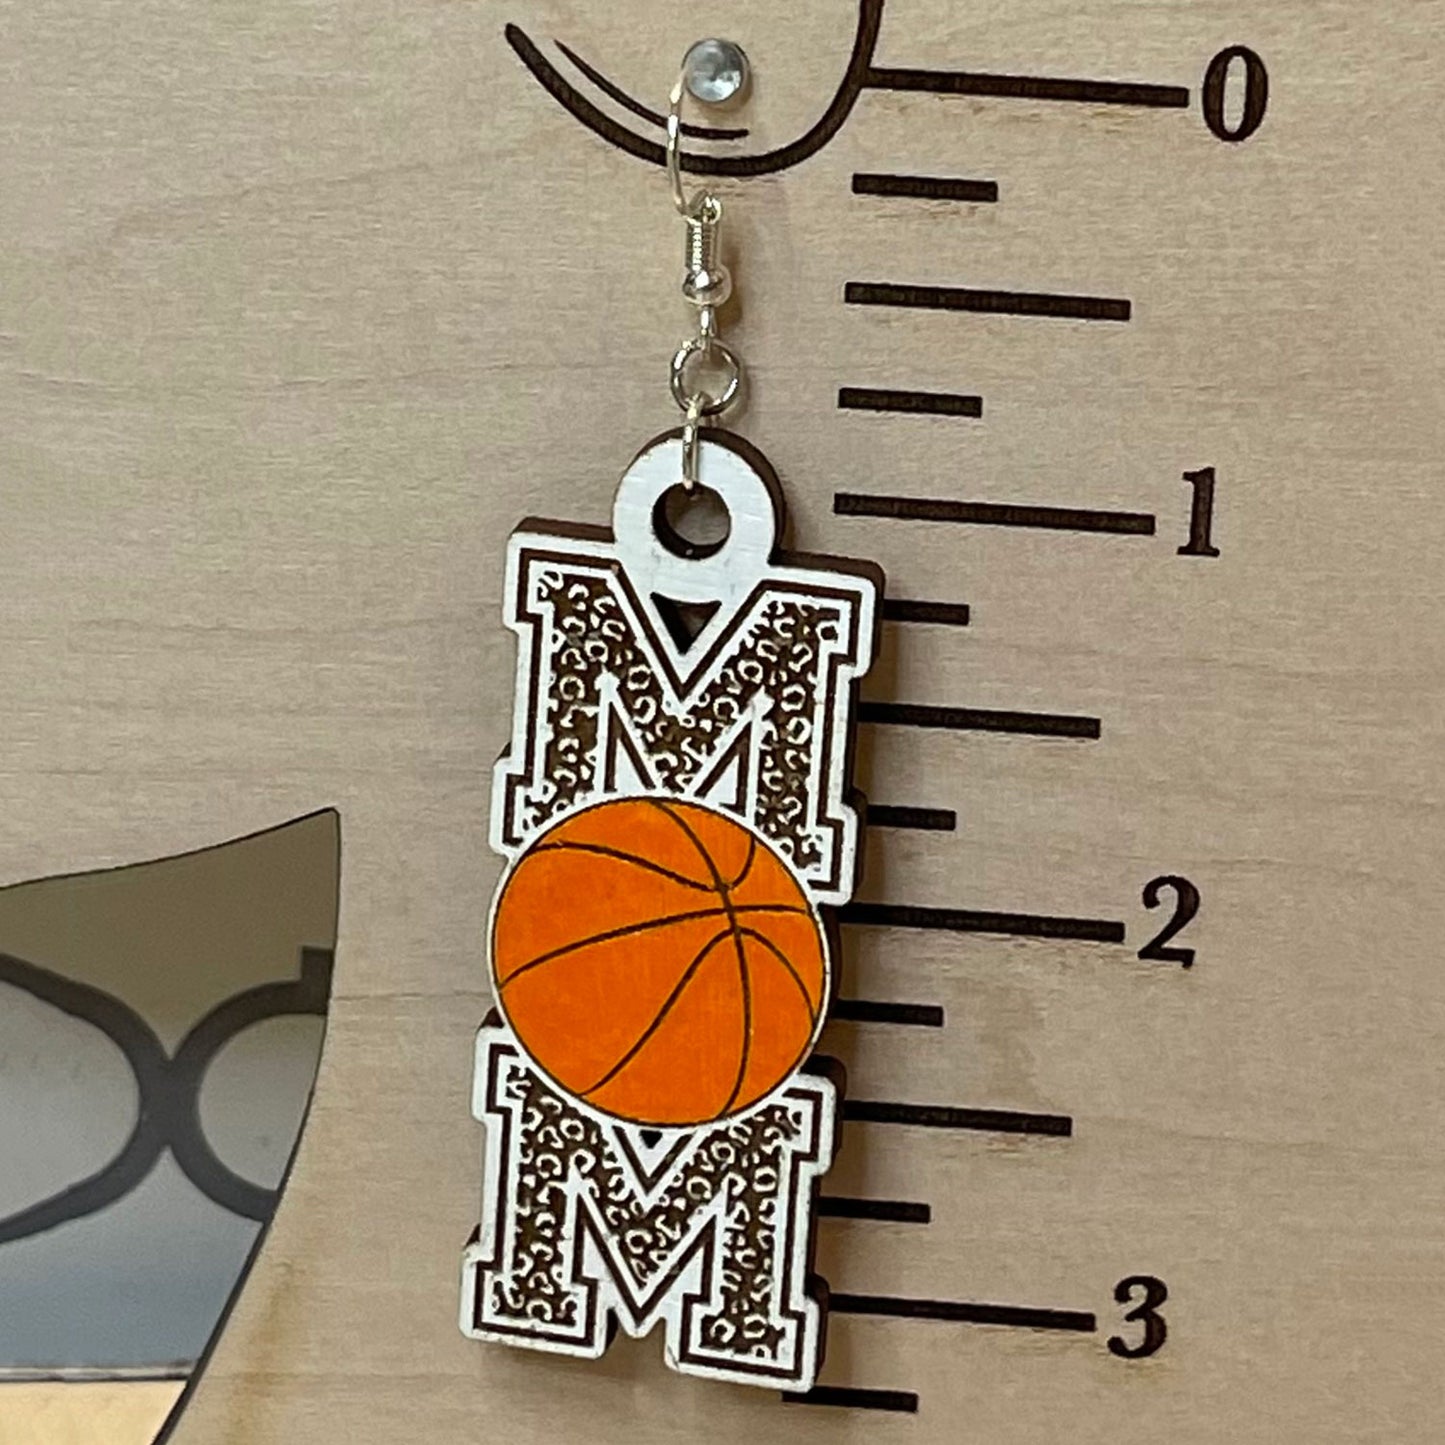 Creative Leather 3D Printed Sports Clear Earrings For Sports For Women  Basketball From Isang, $0.59